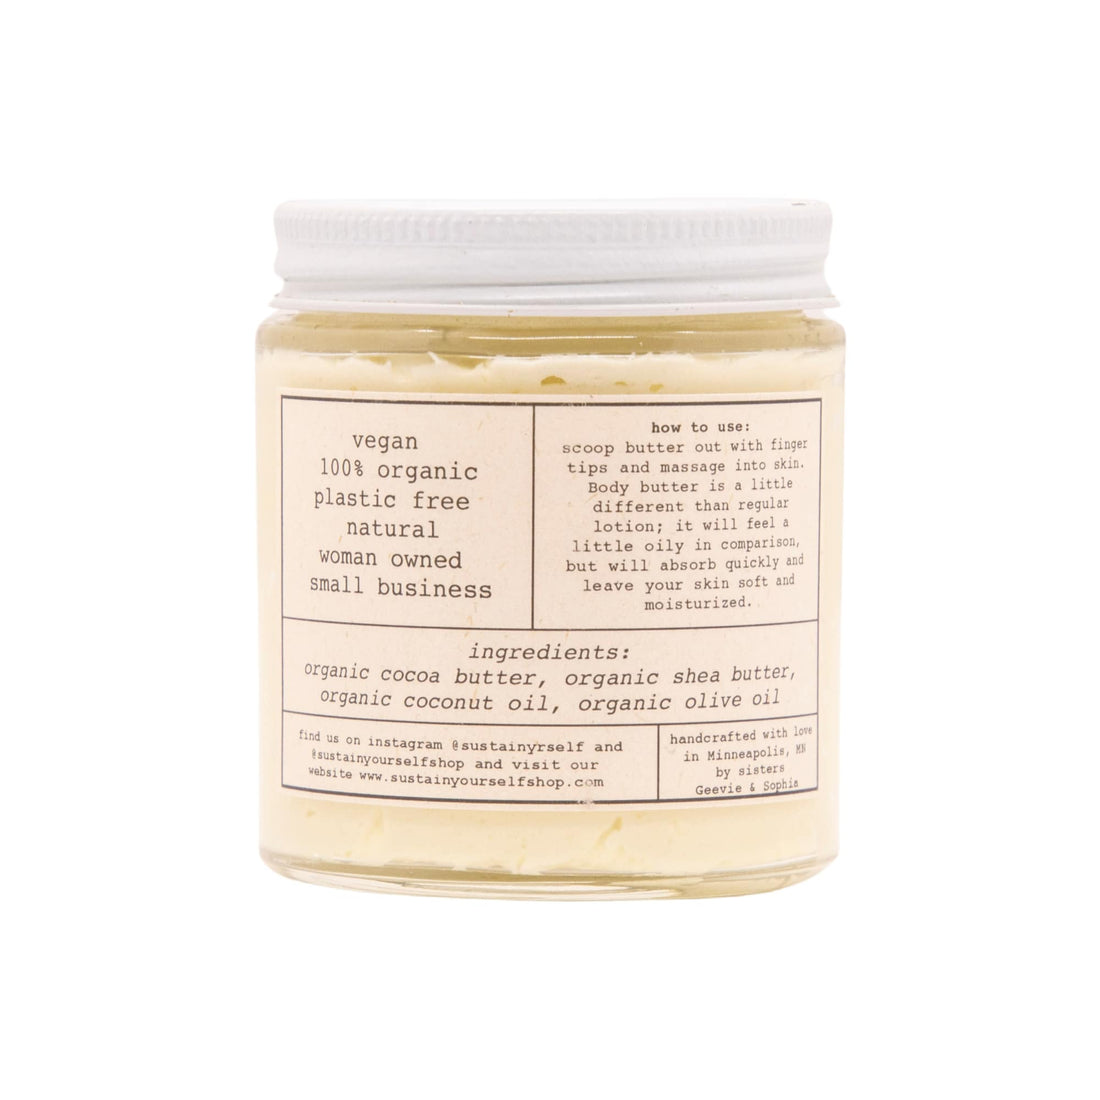 Organic Body Butter - Unscented